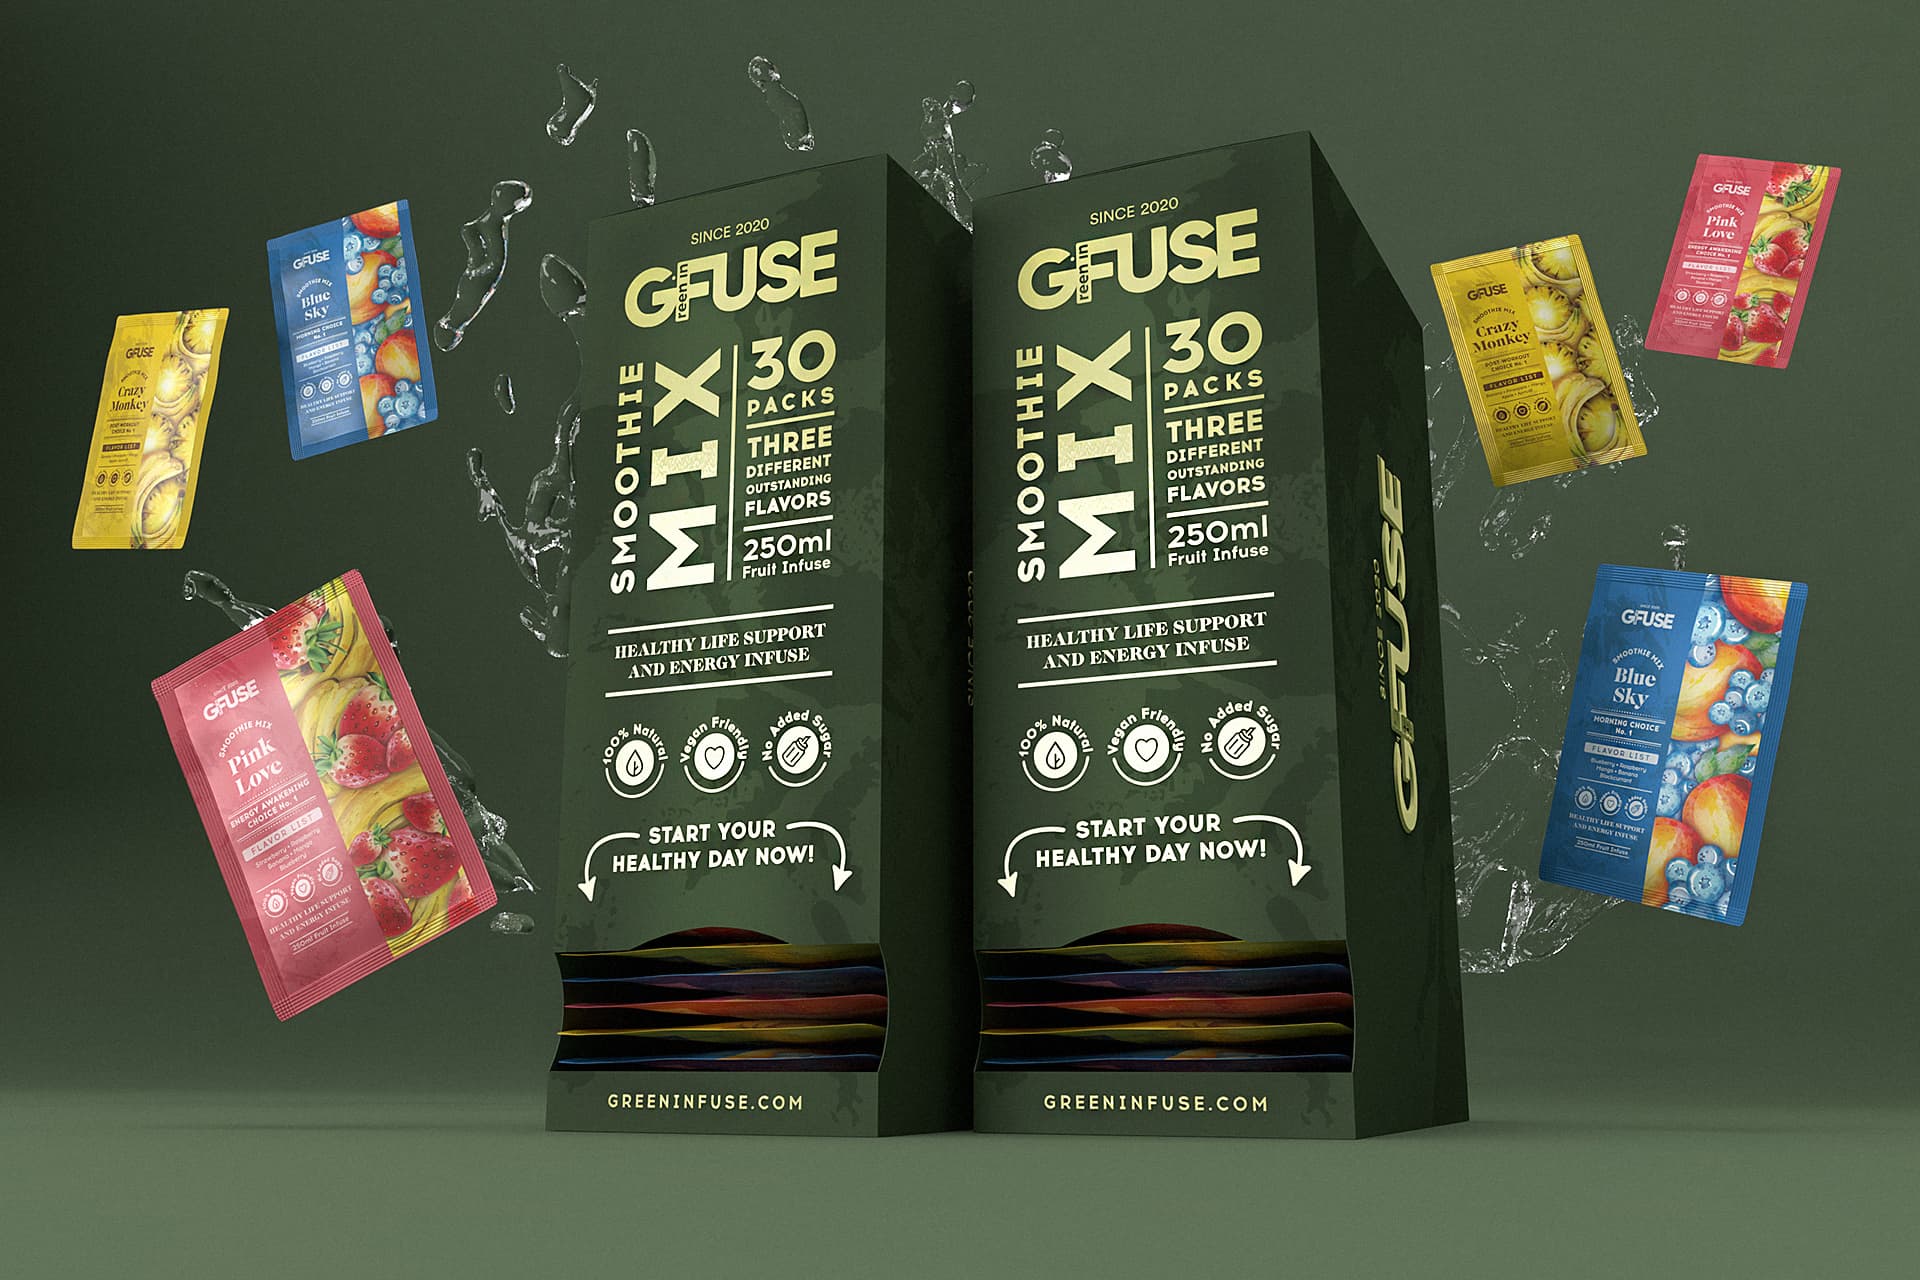 GFuse smoothie mixes in three colors, blue, red, and yellow, each one containing different flavors, pink love is strawberry flavor, crazy monkey - is banana flavor, and blue sky - is blueberry. GFuse is a healthy smoothie brand from Lithuania.